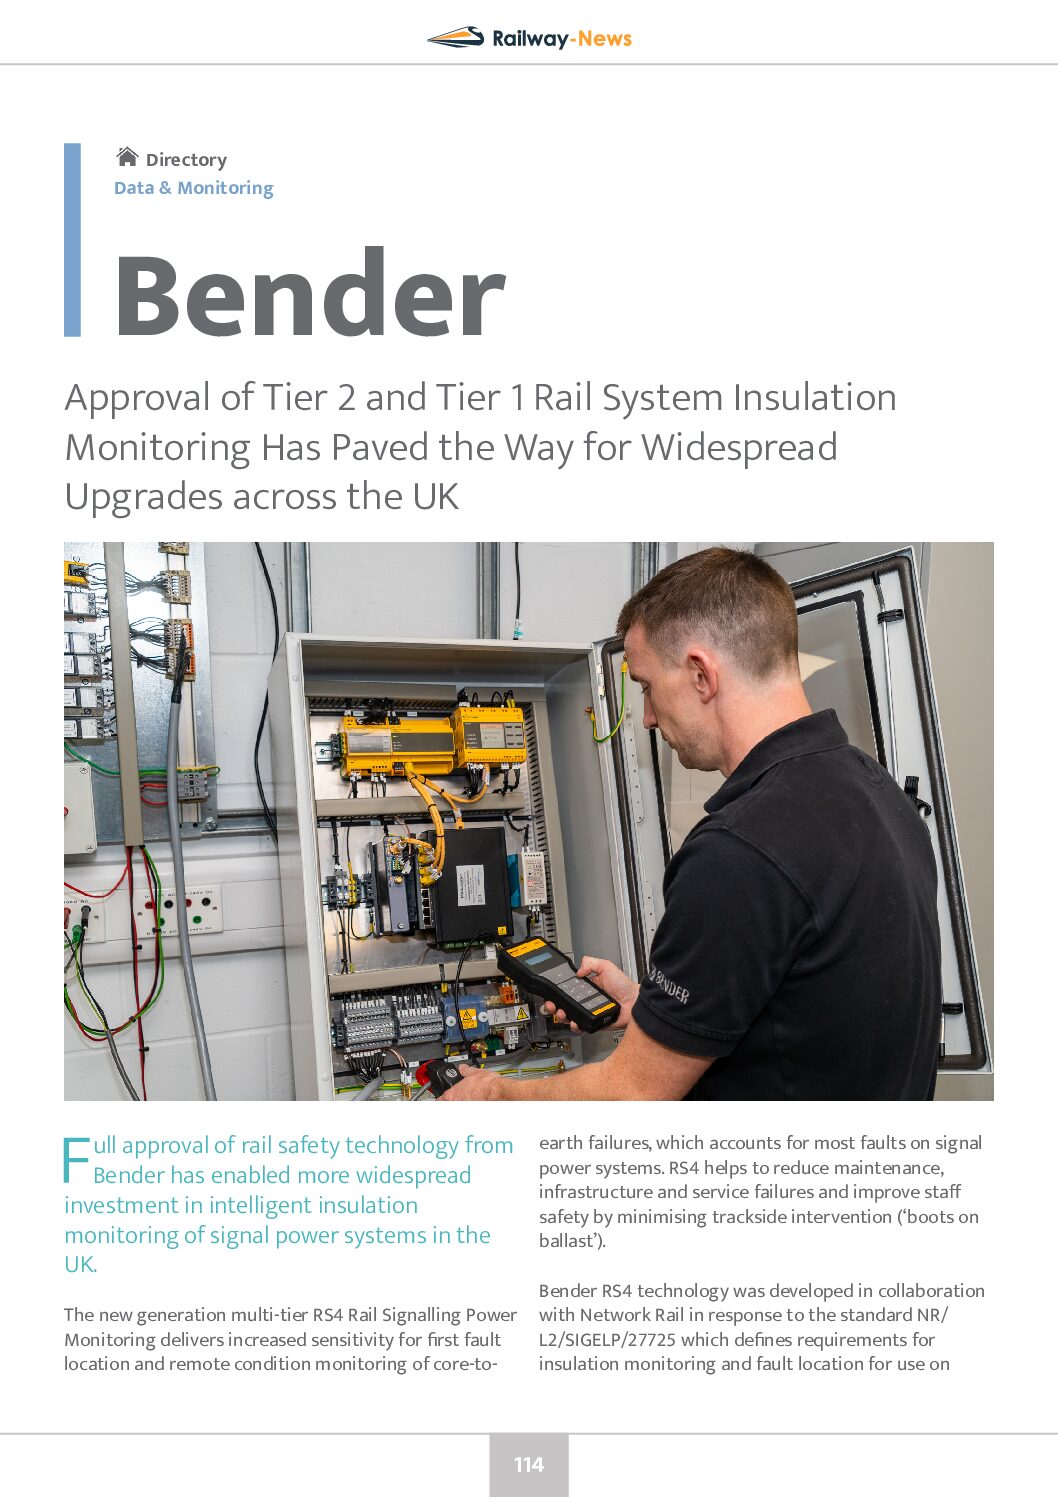 Approval of Tier 2 and Tier 1 Rail System Insulation Monitoring